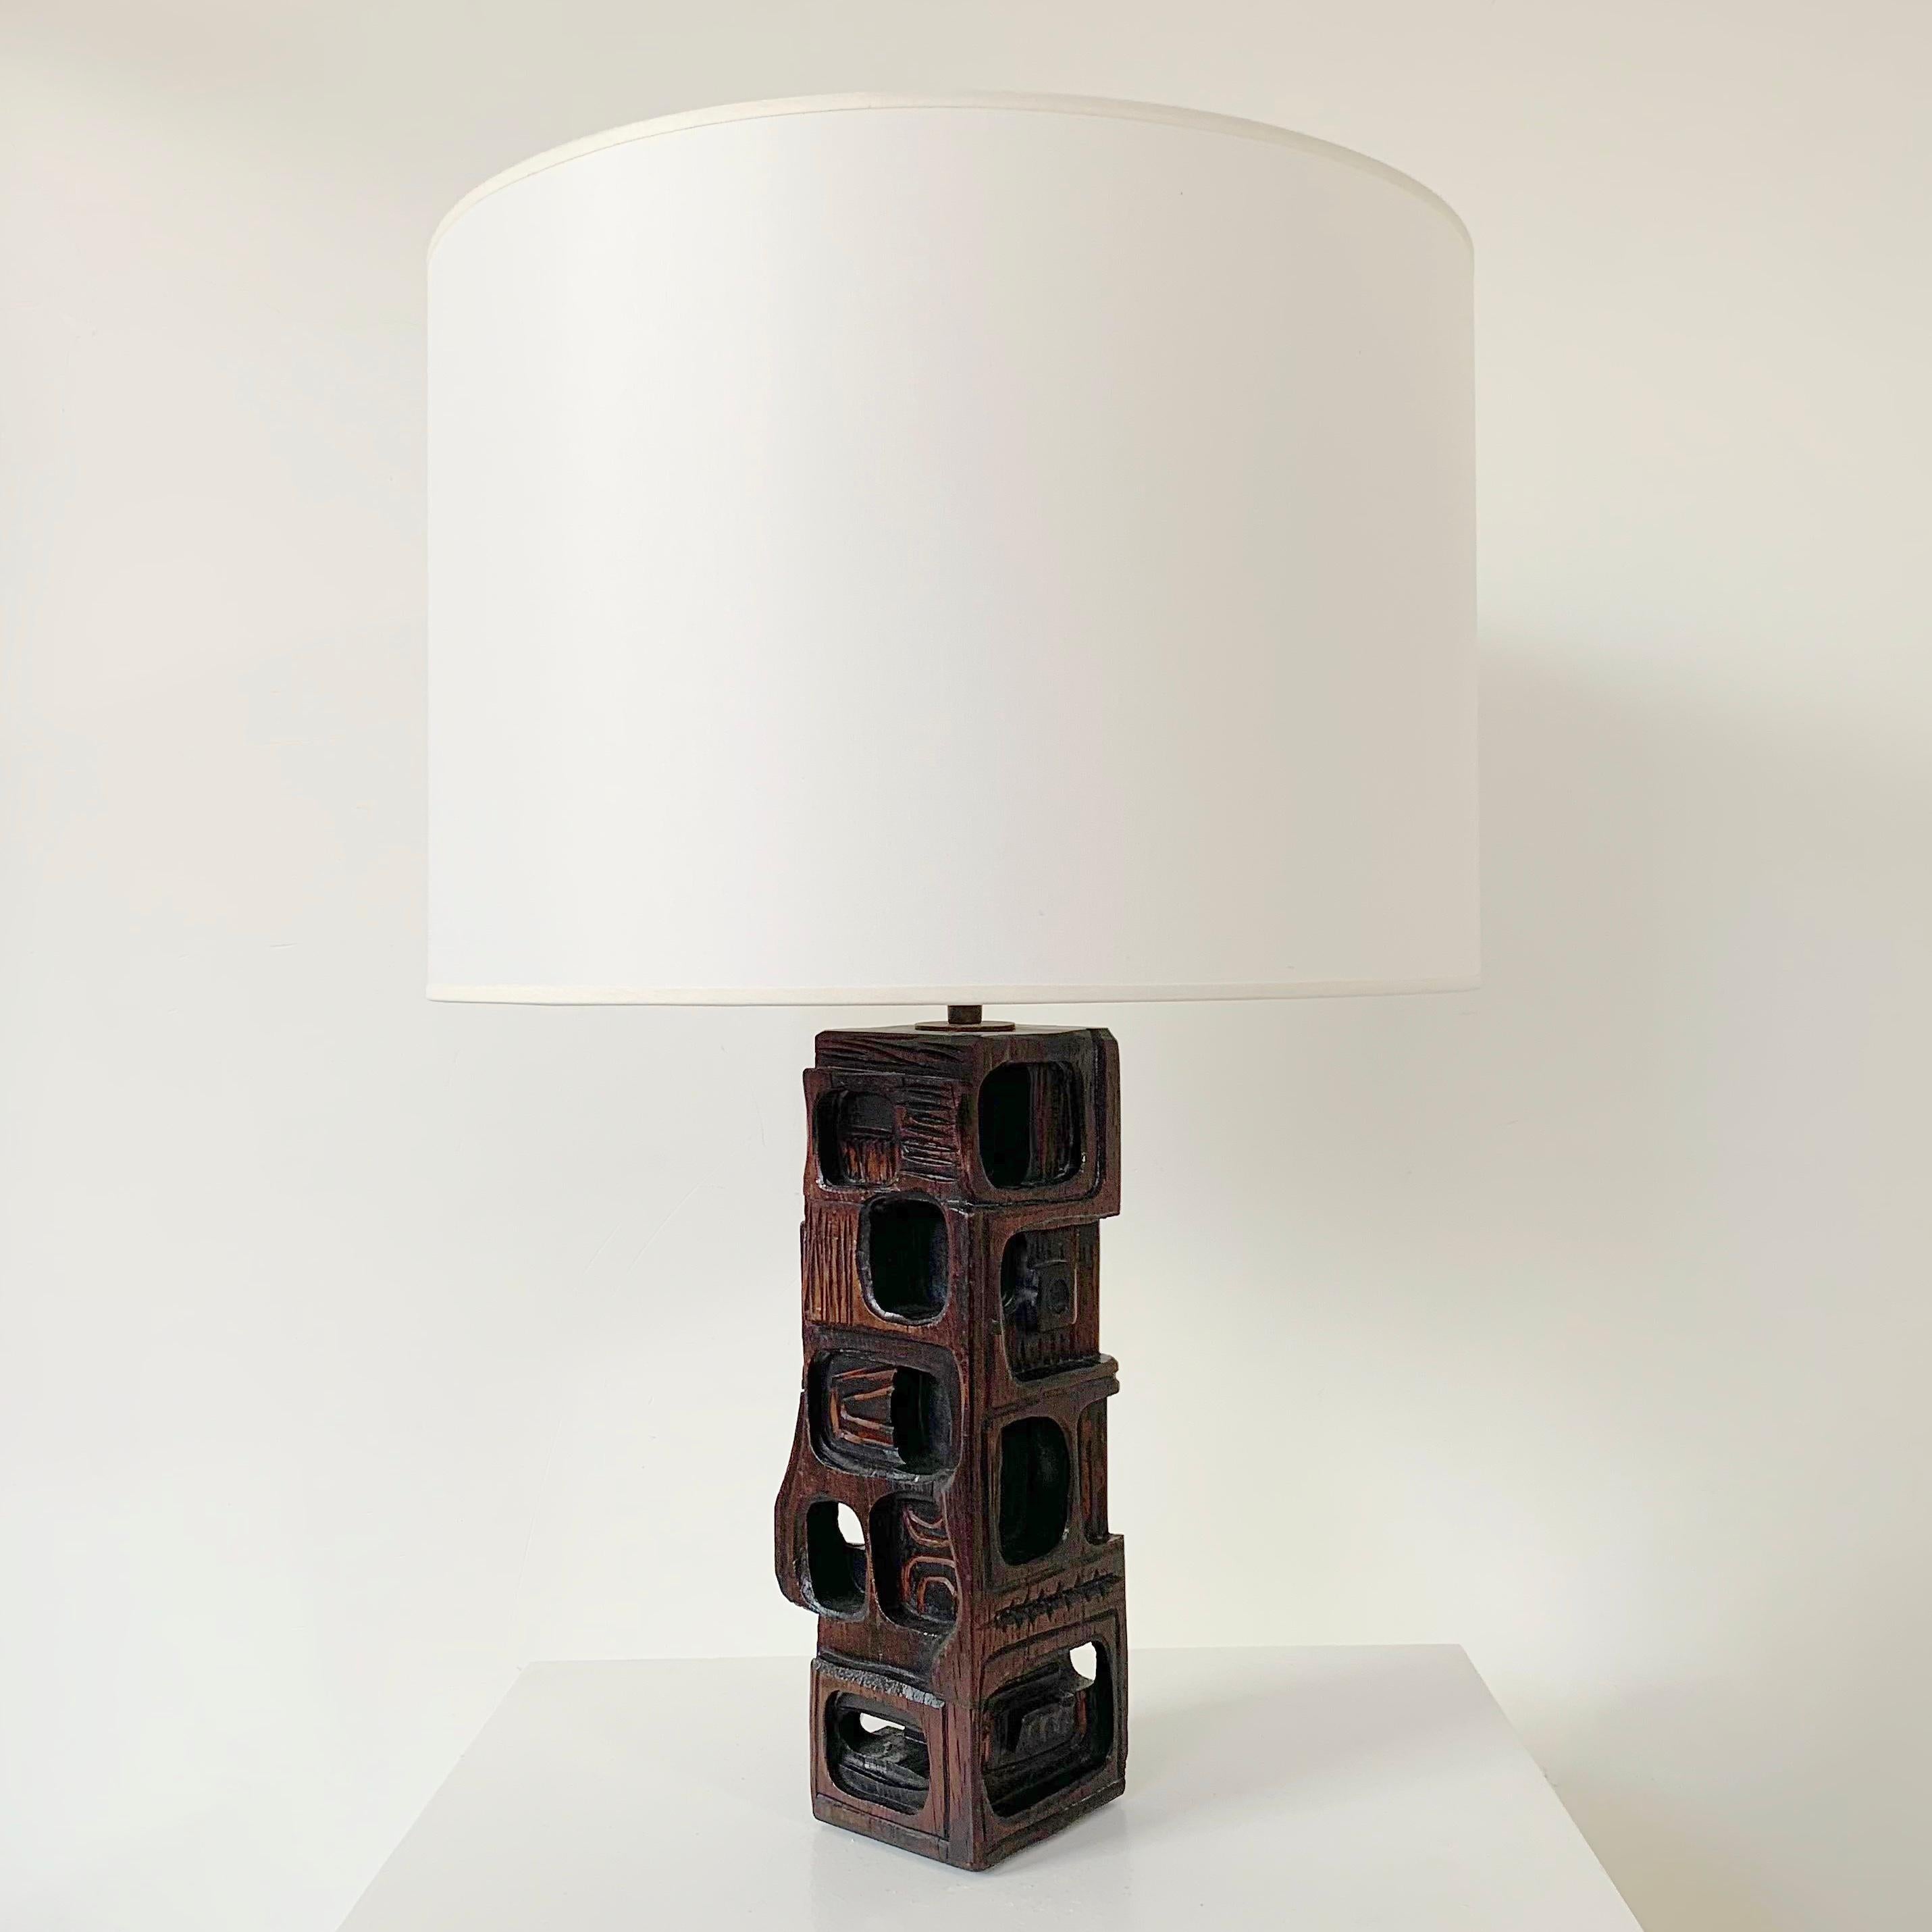 Italian Sculptural Hand Carved Table Lamp by Gianni Pinna, c.1970, Italy.